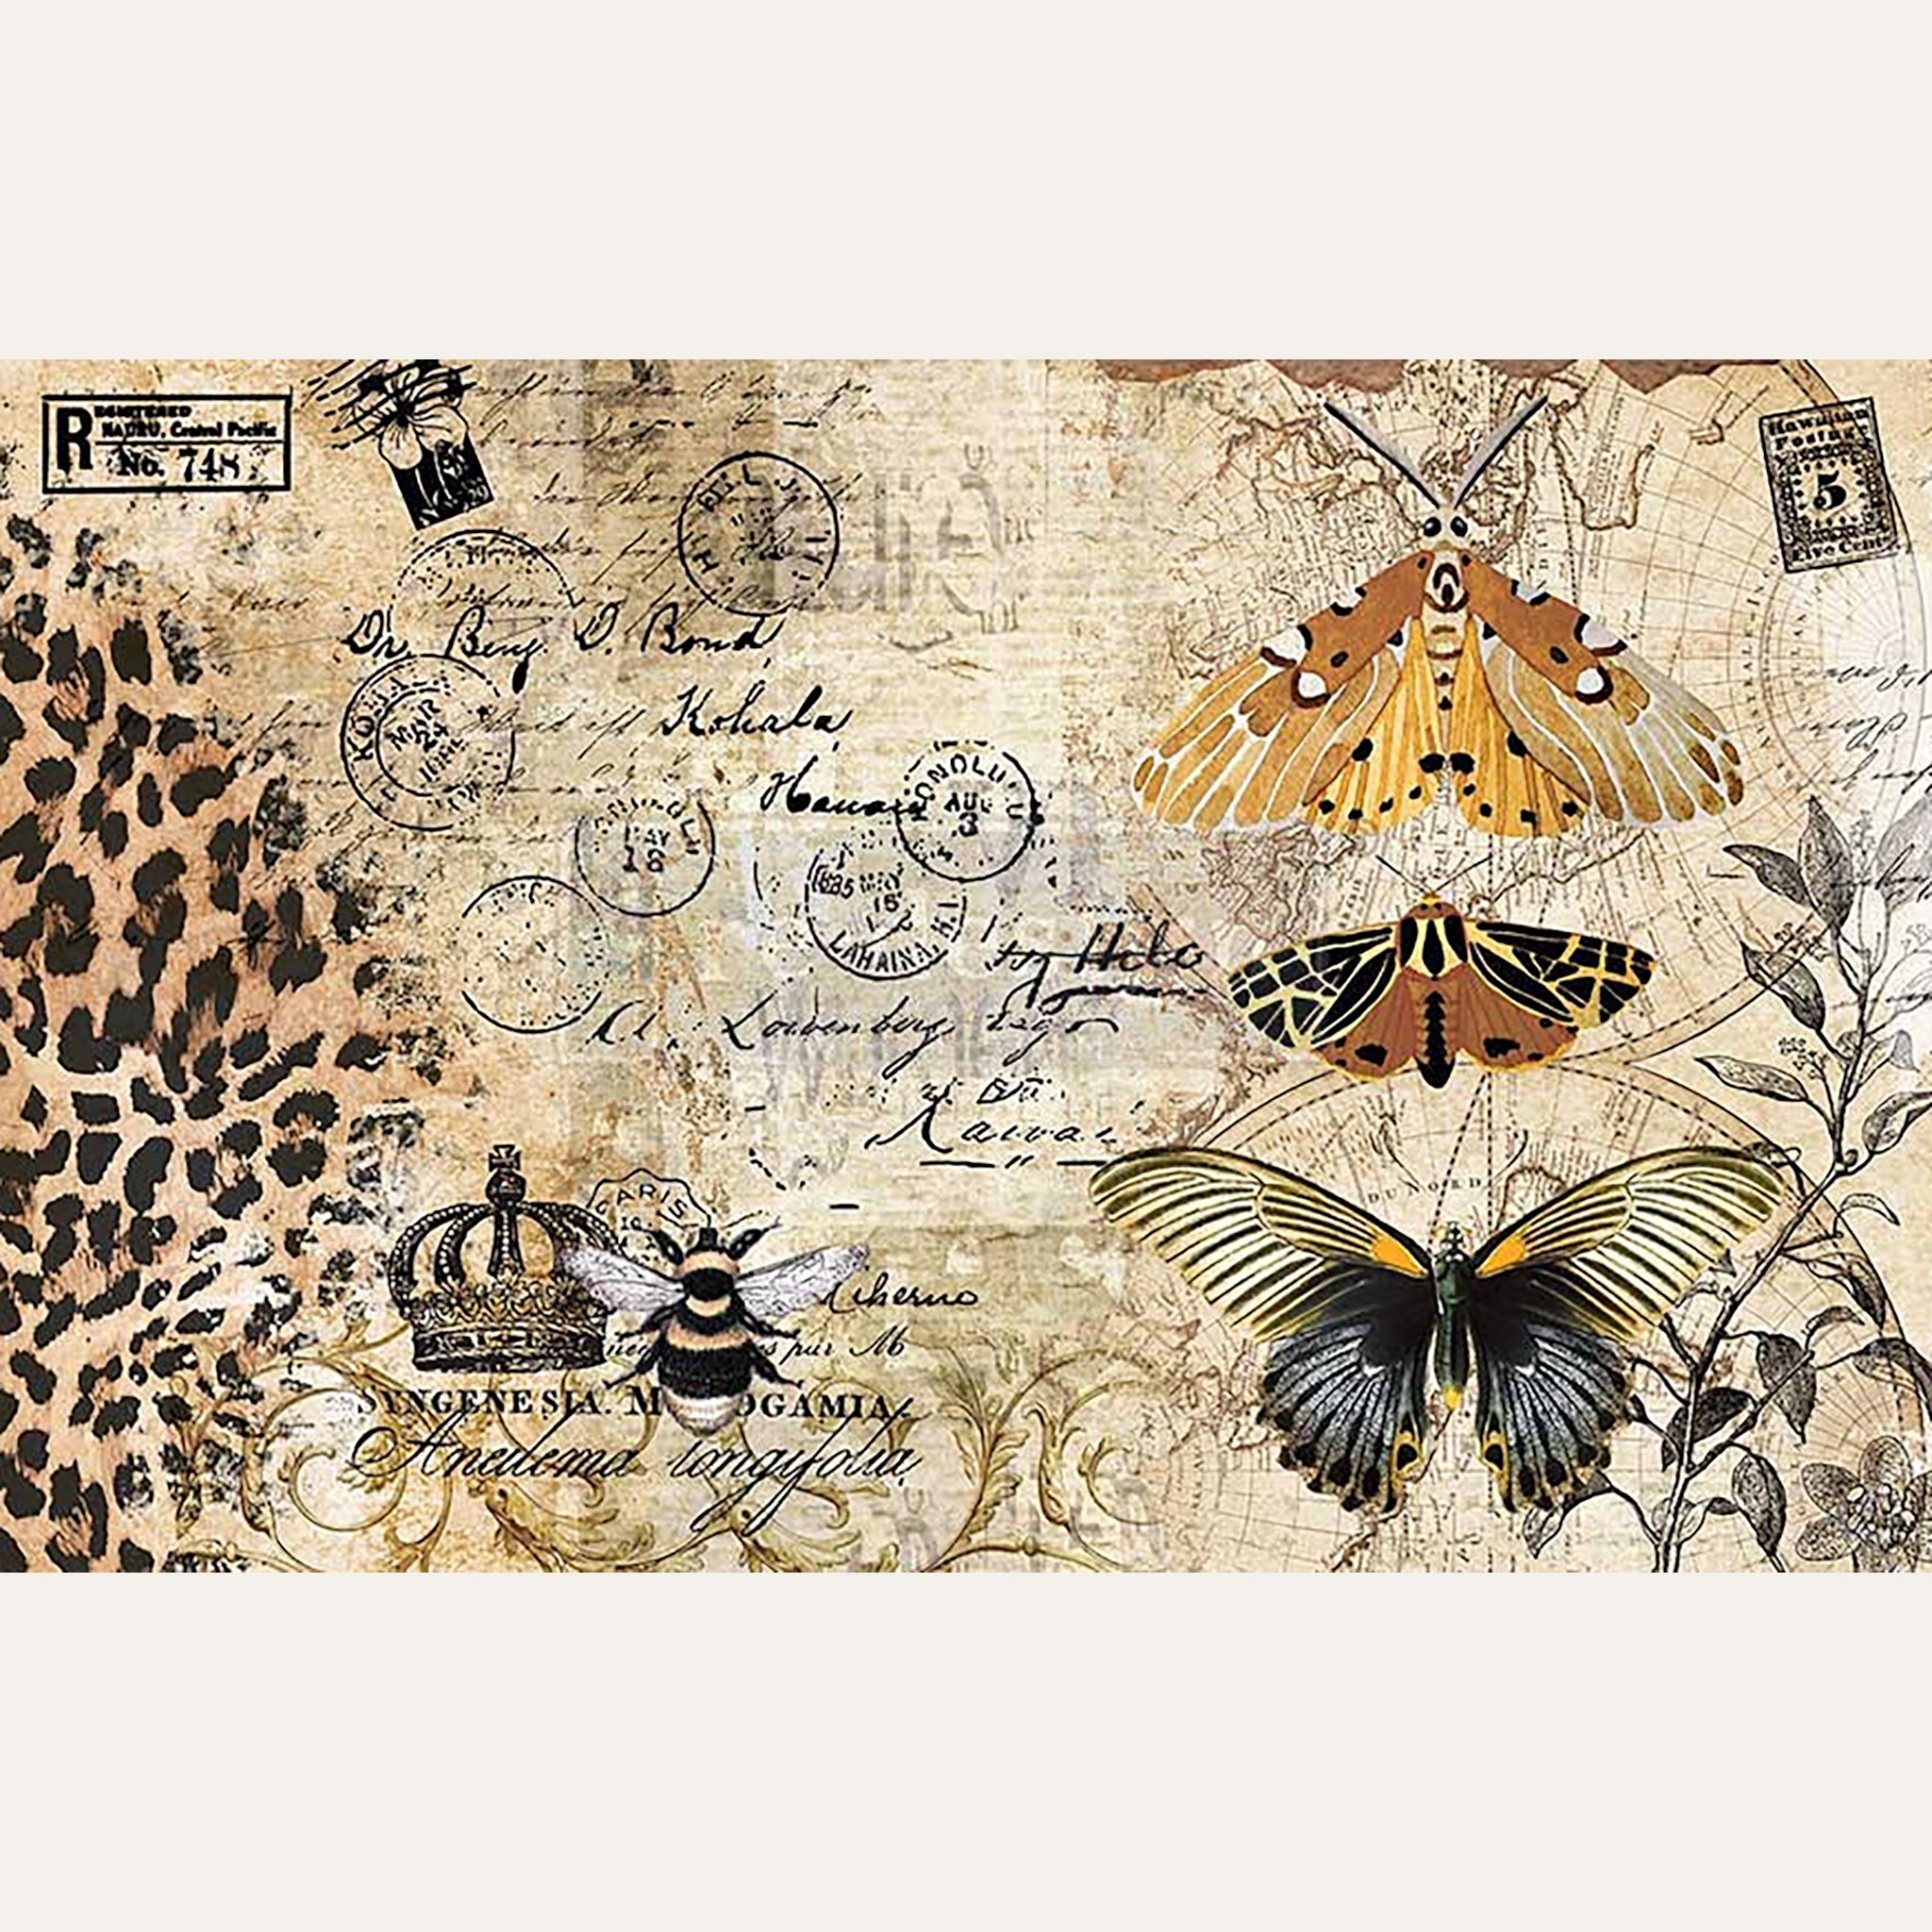 Tissue paper design of vintage postal parchment with bees, moths, and butterflies. White borders are on the top and bottom.